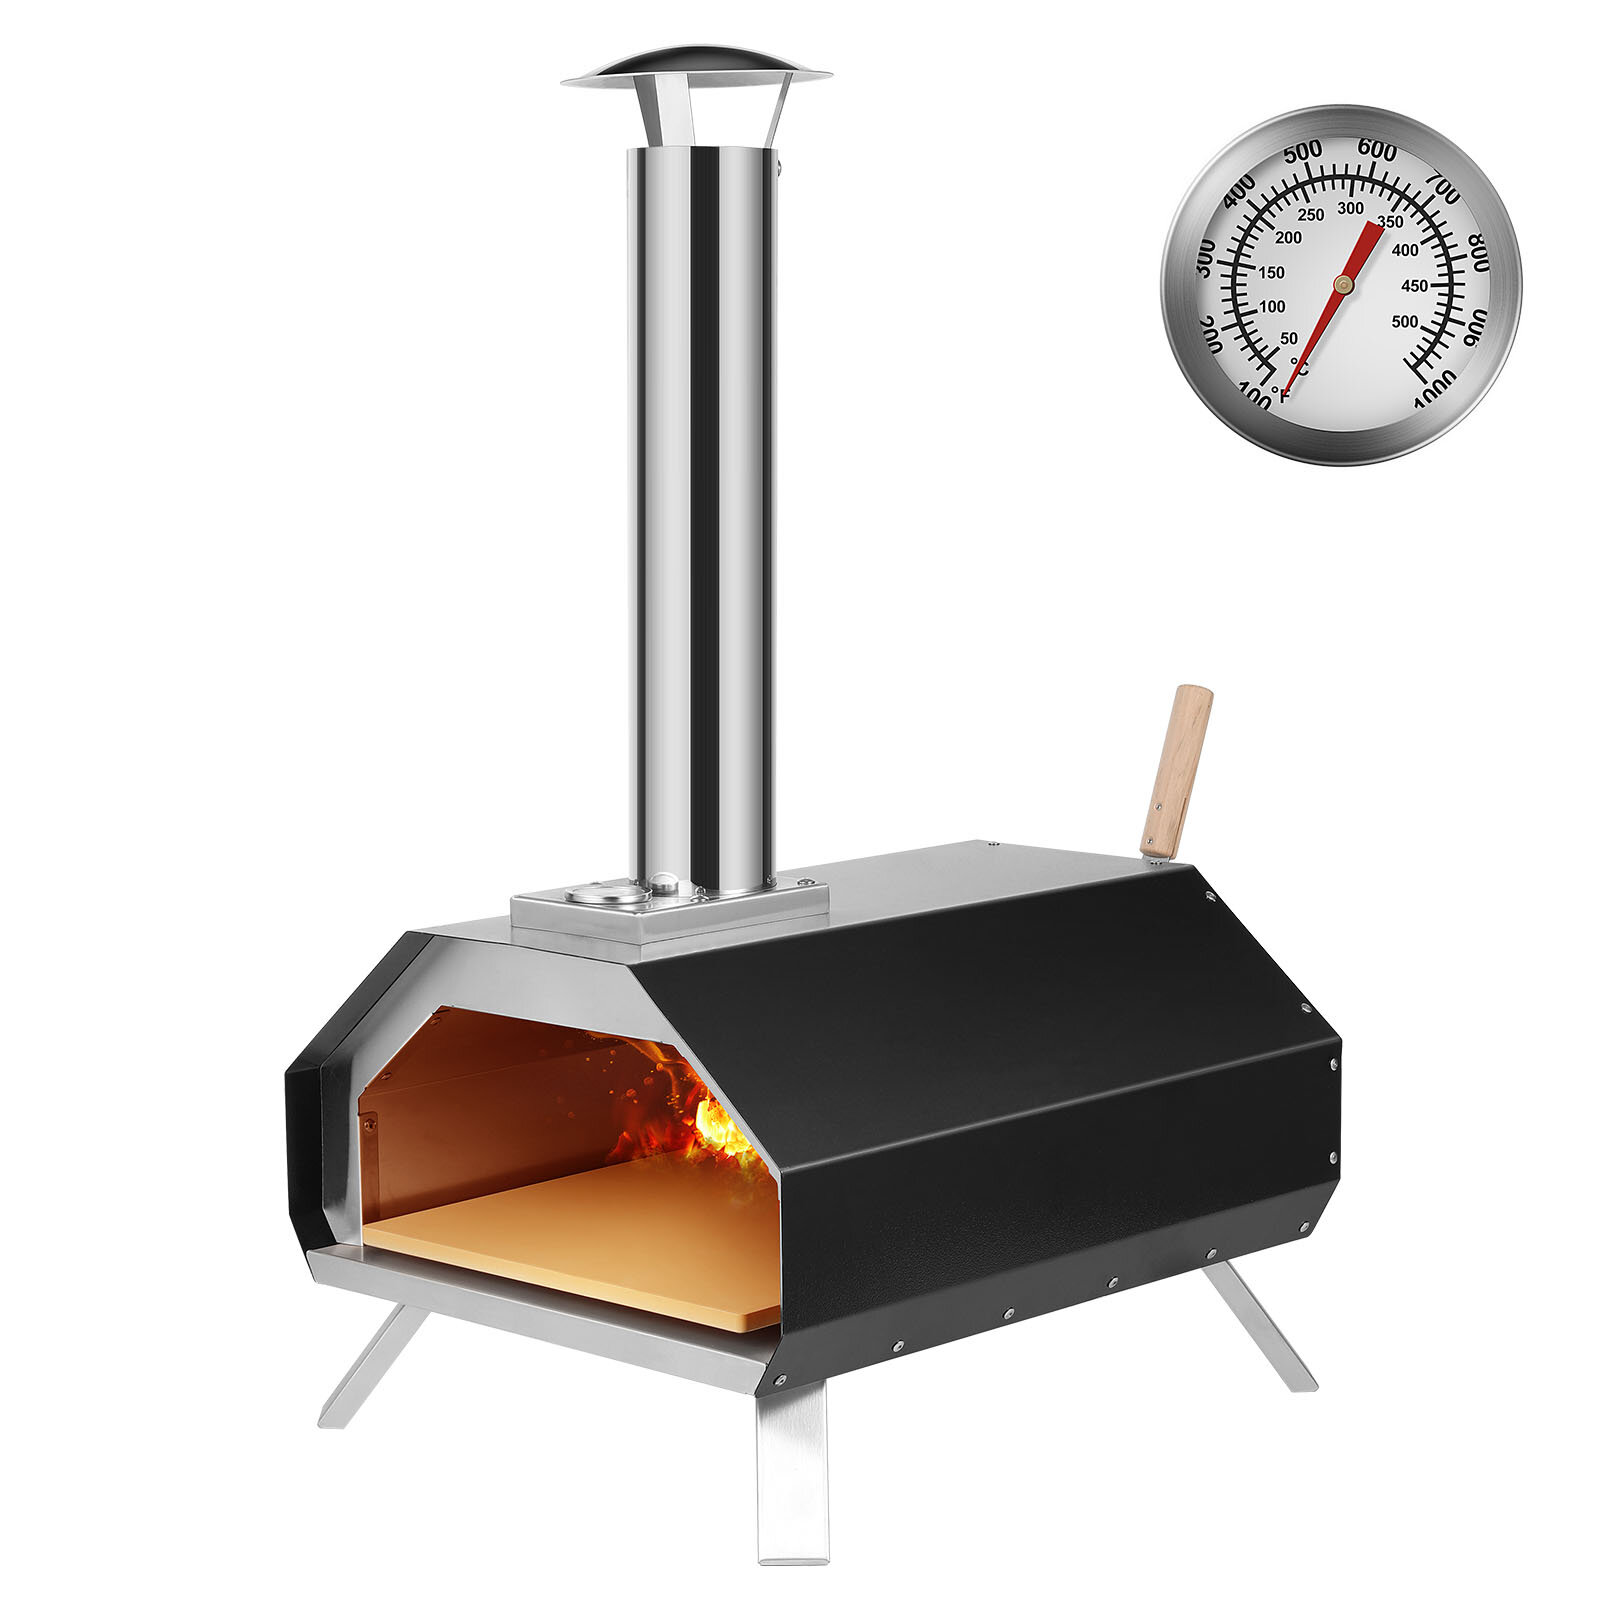 HiMombo Pizza Oven Outdoor, Multi-Fuel Pizza Oven Gas & Wood Pellet Fired Pizza Maker High Temperature Resistant Coating